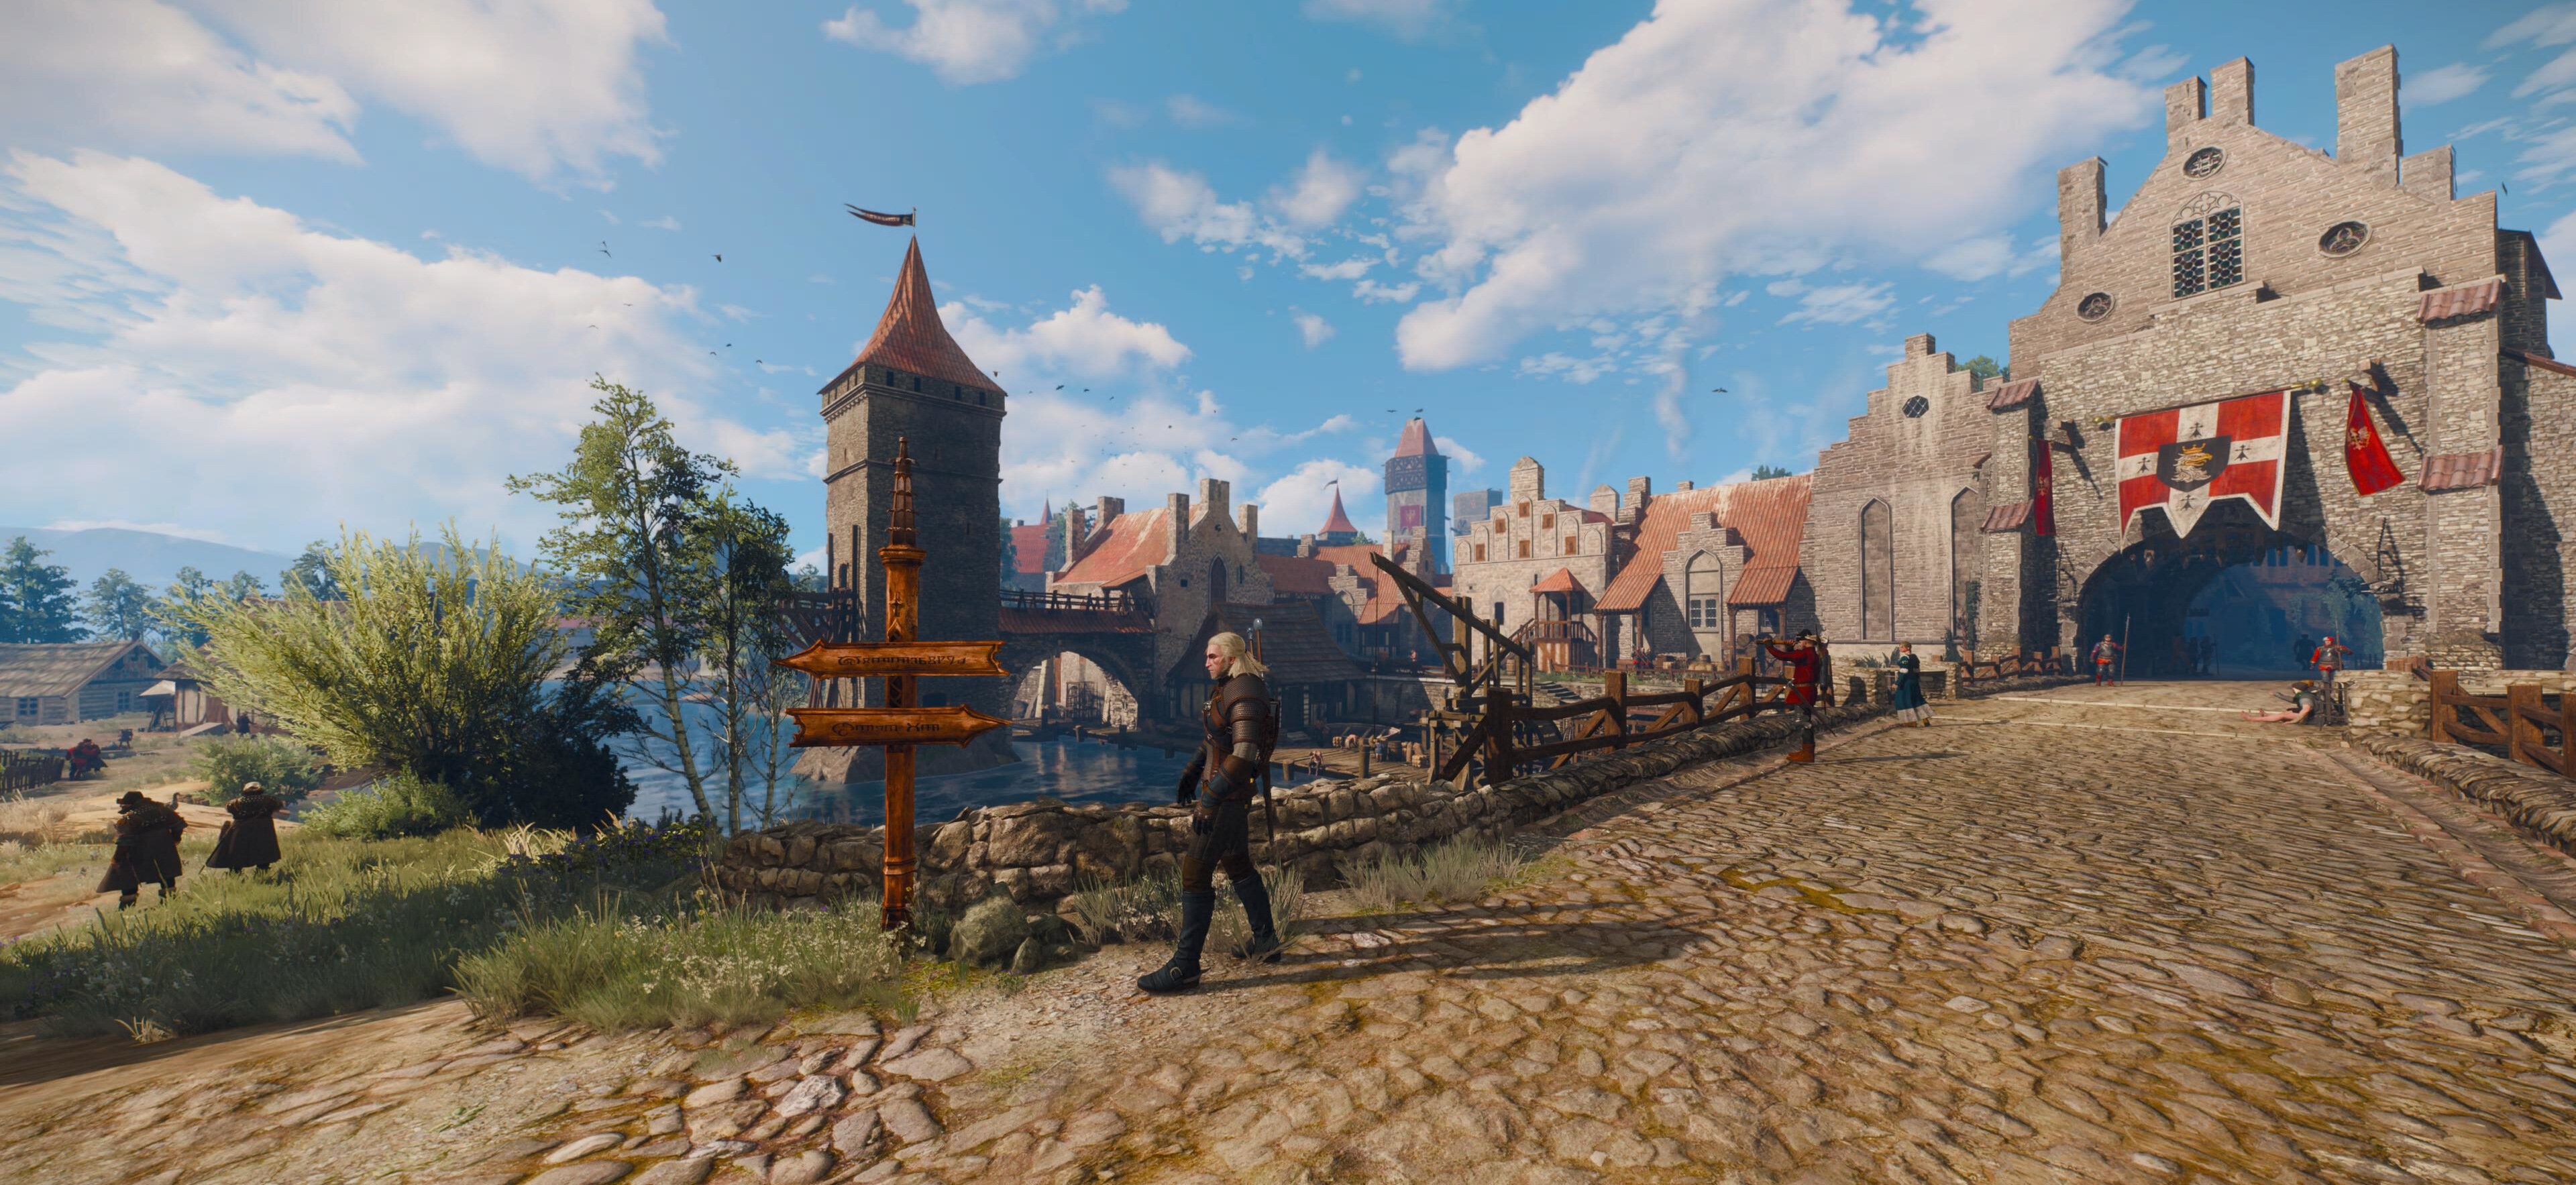 1692592434-the-witcher-3-wild-hunt-complete-edition-20230815202932.jpg